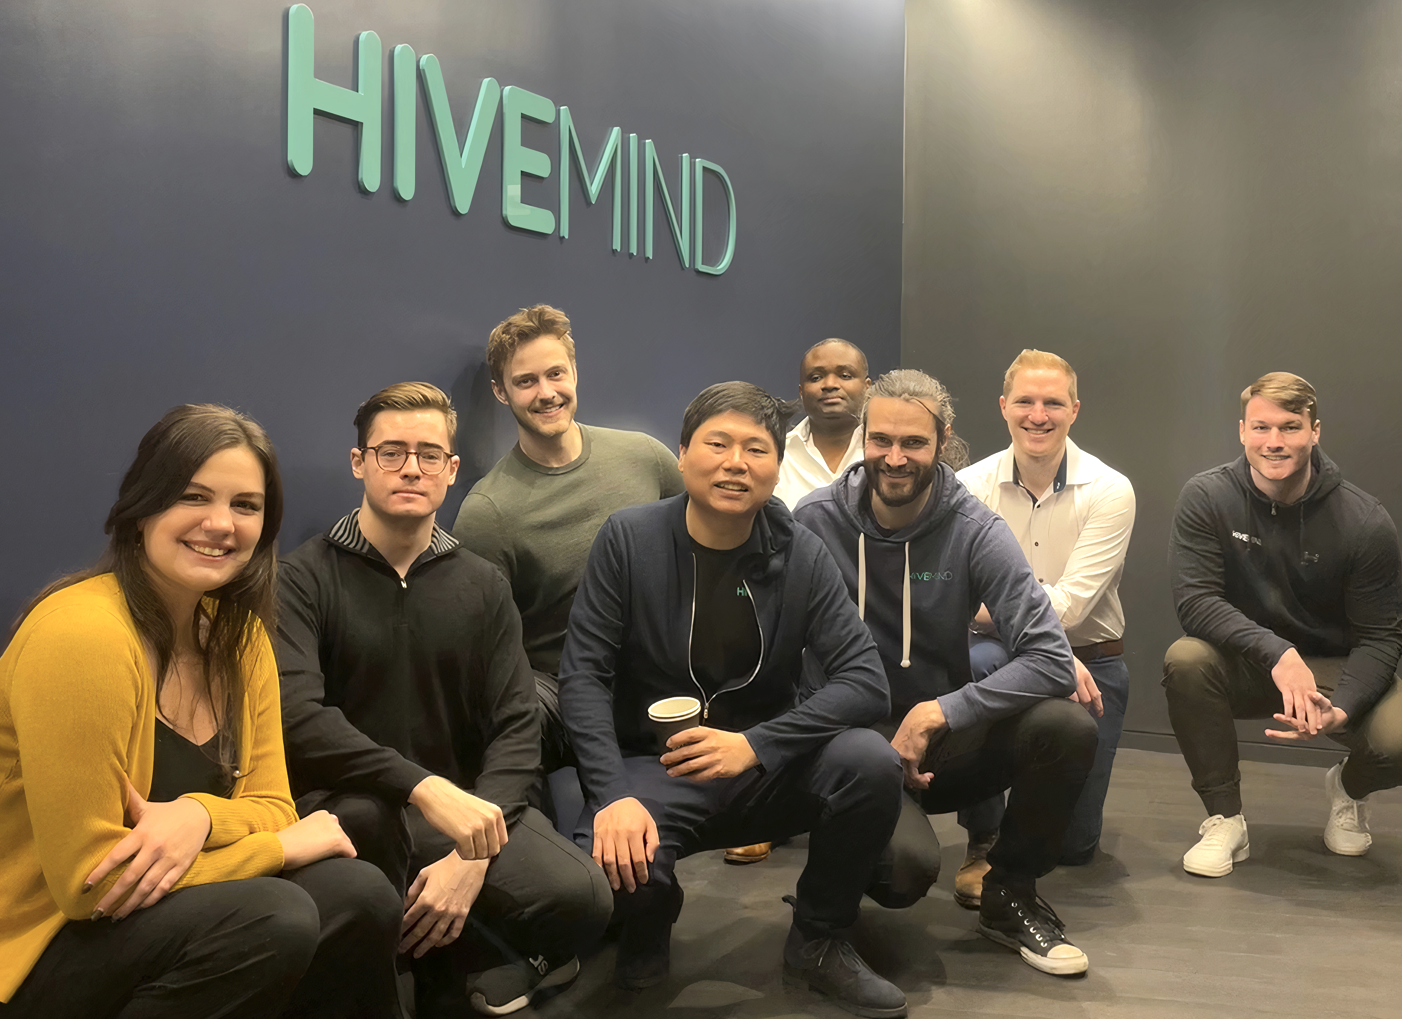 The Hivemind team poses in front of their logo on the wall of their new NYC headquarters.